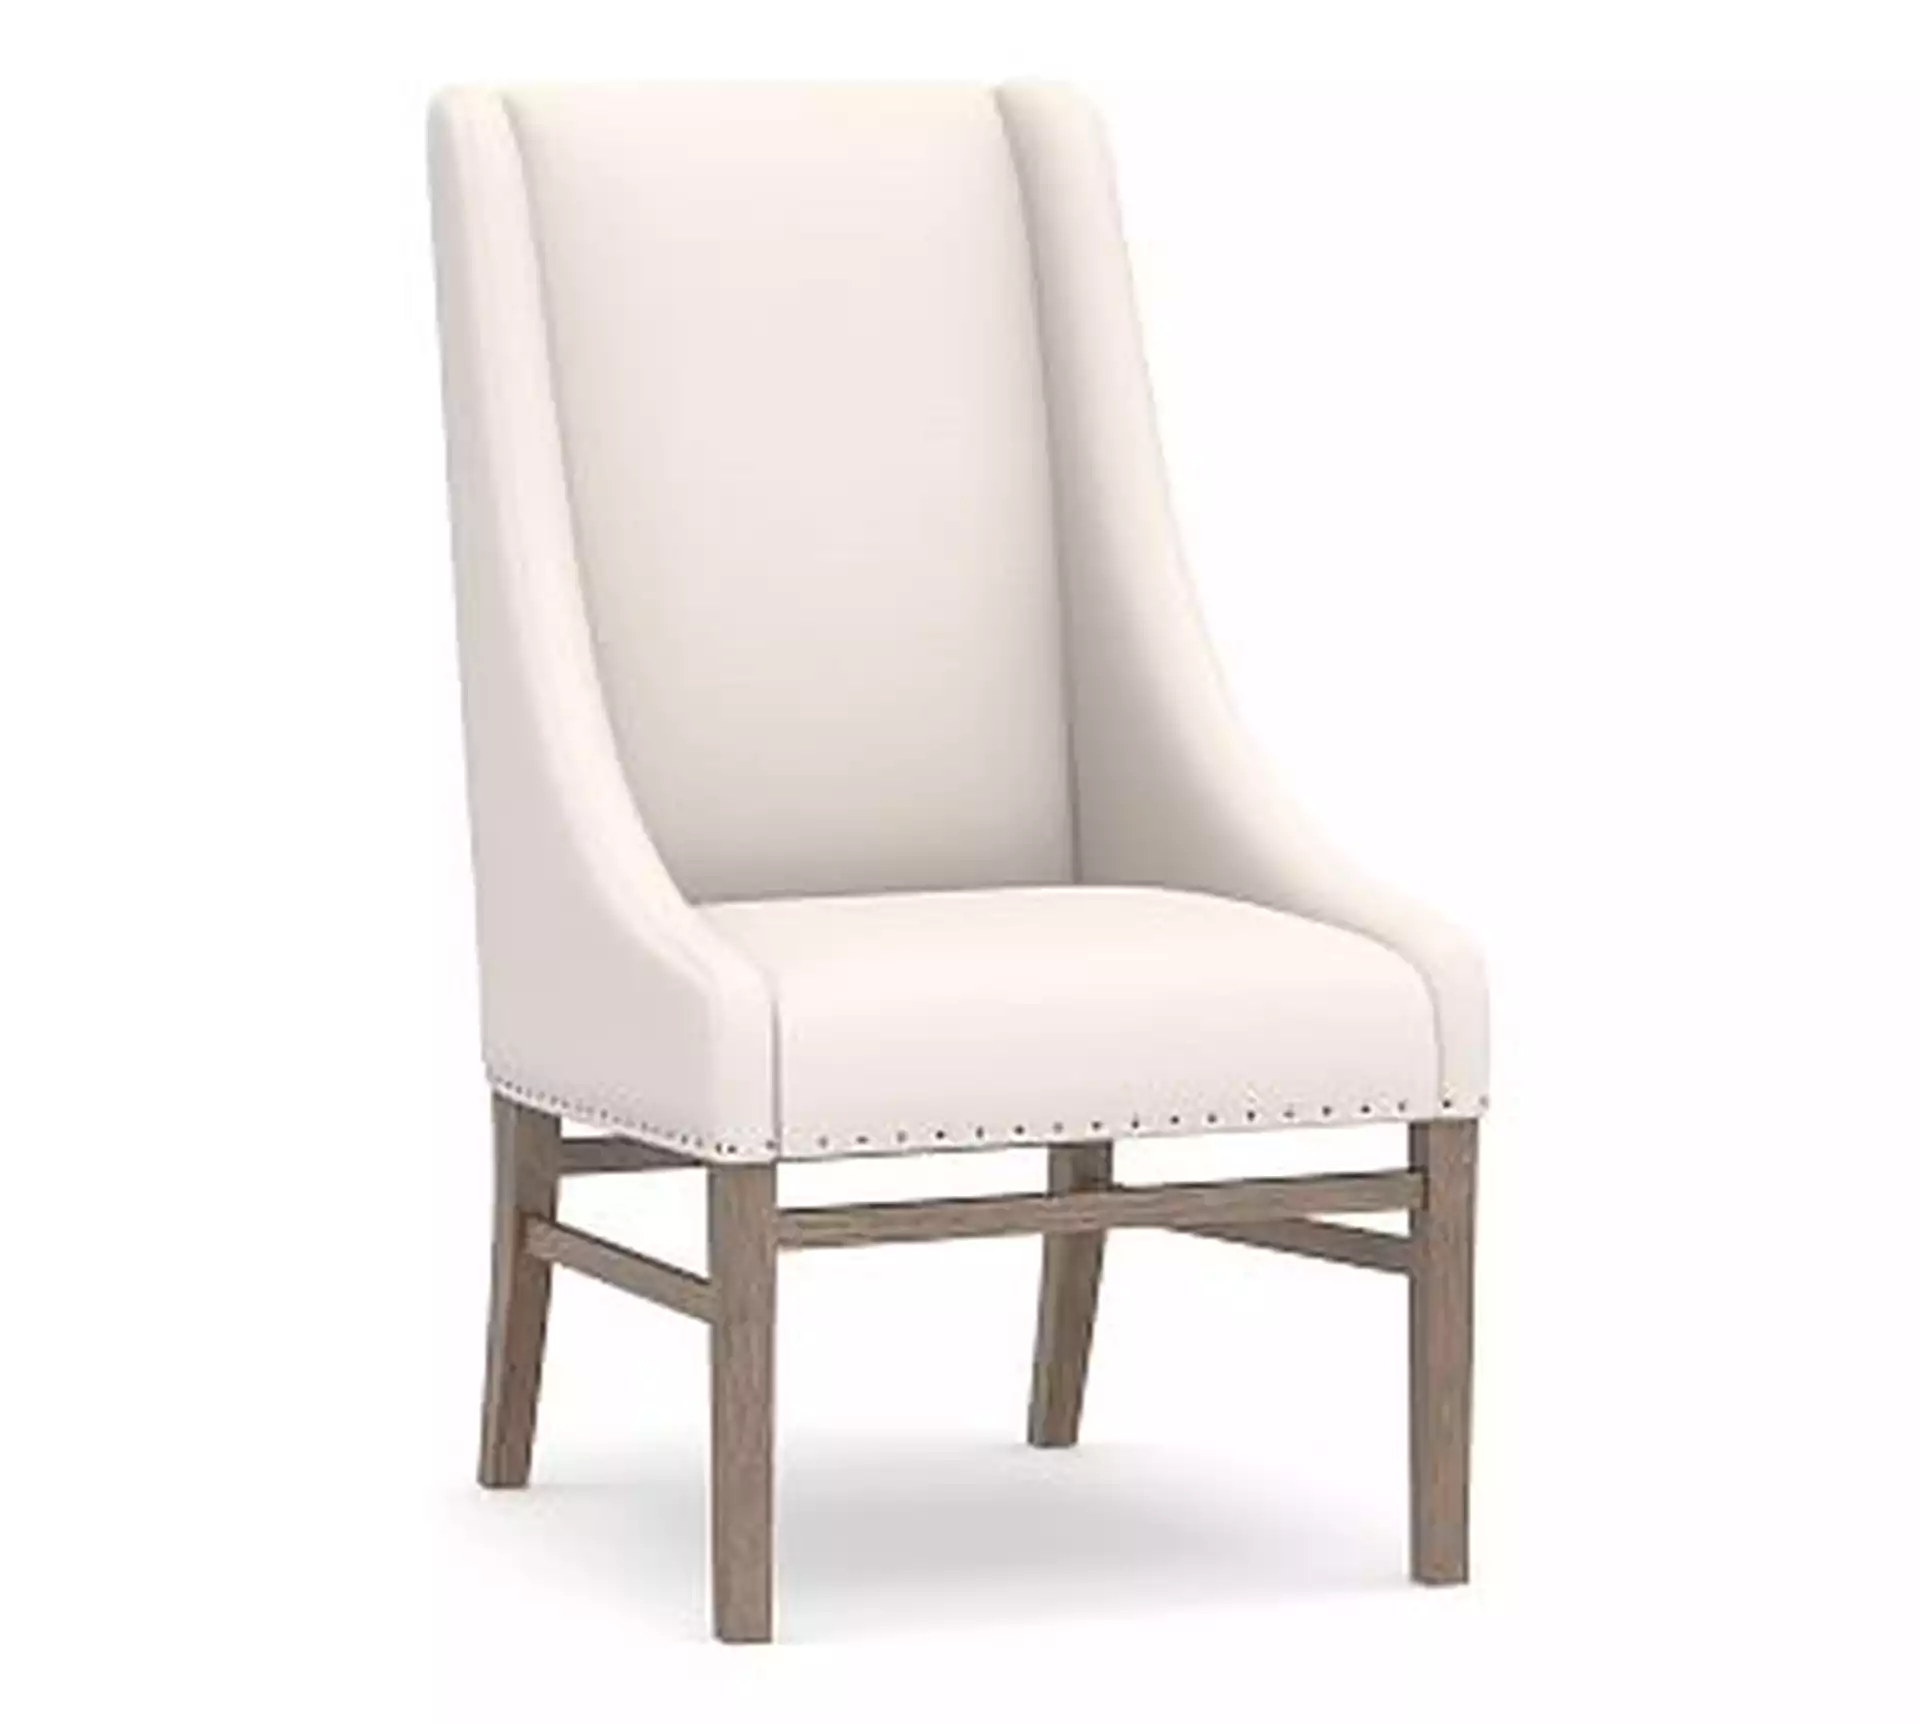 Milan Slope Arm Upholstered Dining Side Chair, Gray Wash Leg, Performance Chateau Basketweave Ivory